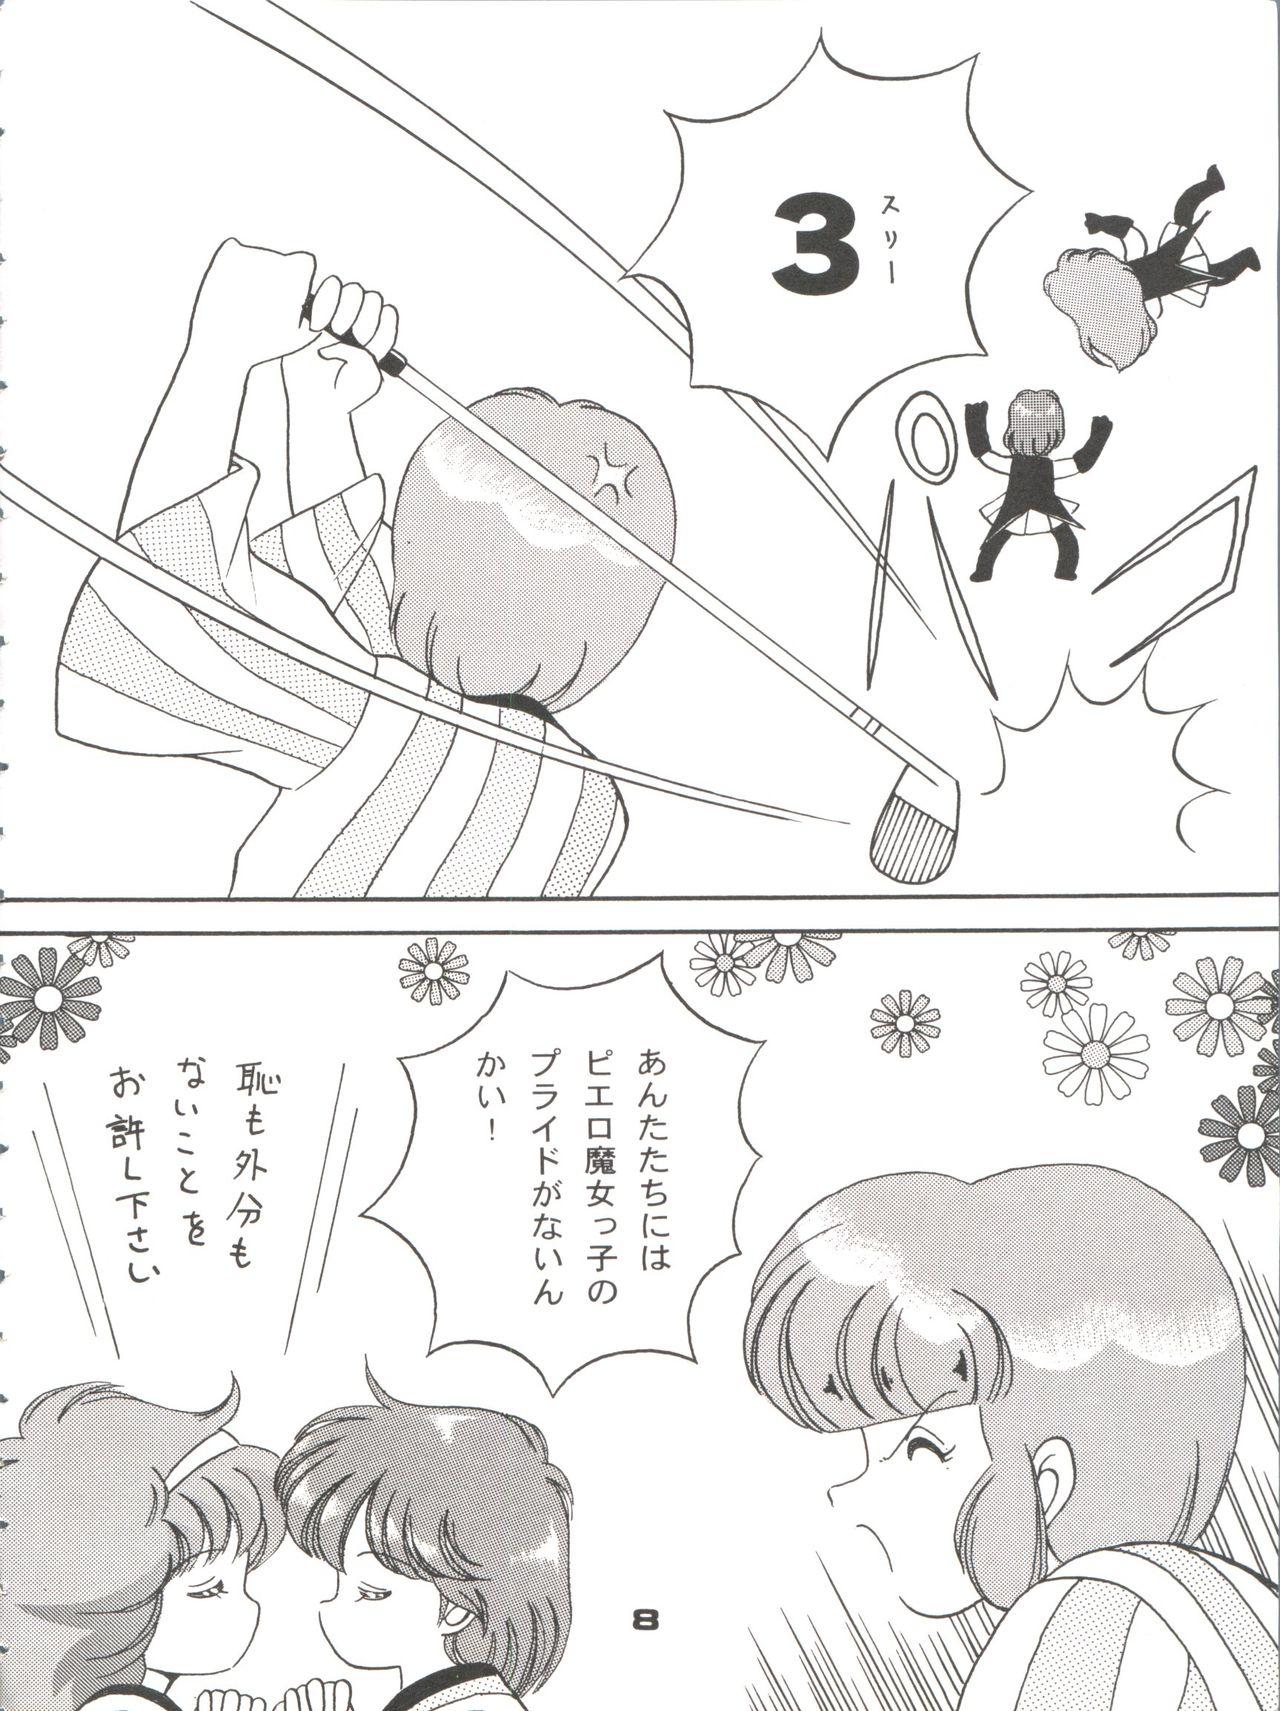 Gay Pawn Magical Ponponpon Returns - Magical emi Petite Teen - Page 7